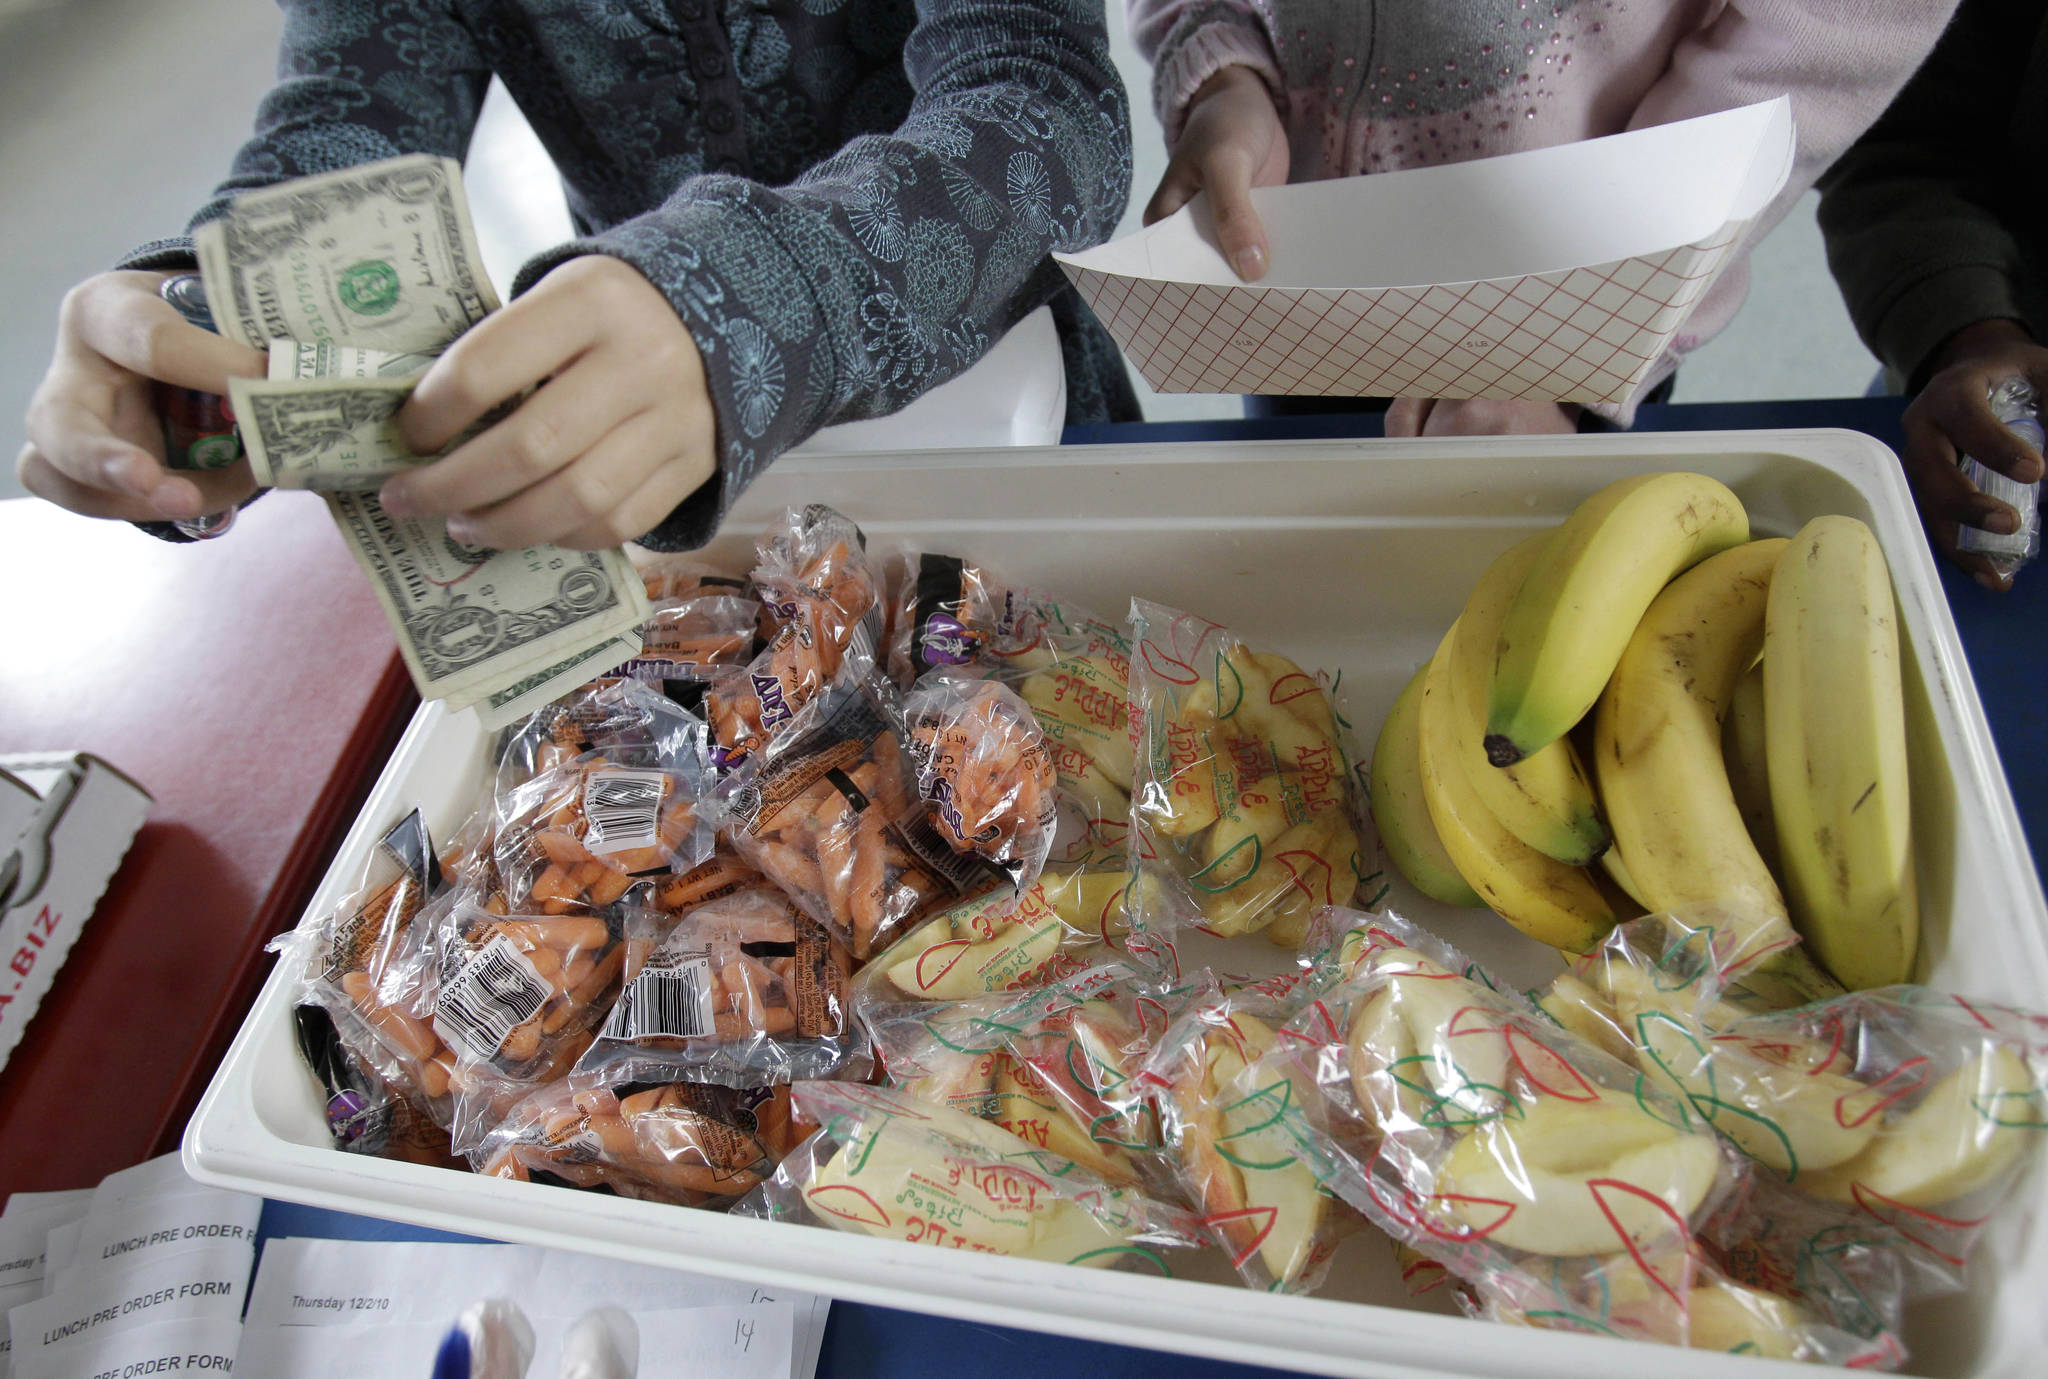 FILE – In this Dec. 2, 2010, file photo, a child pays for a lunch consisting of fruits and vegetables during a school lunch program at Fairmeadow Elementary School in Palo Alto, Calif. California and Pennsylvania both passed laws in 2017 to outlaw "lunch shaming" of children for unpaid meals, with the Pennsylvania measure that became law in November requiring communication about money owed on meal accounts to be done between school officials and parents, and not involve the student. (AP Photo/Paul Sakuma, File)